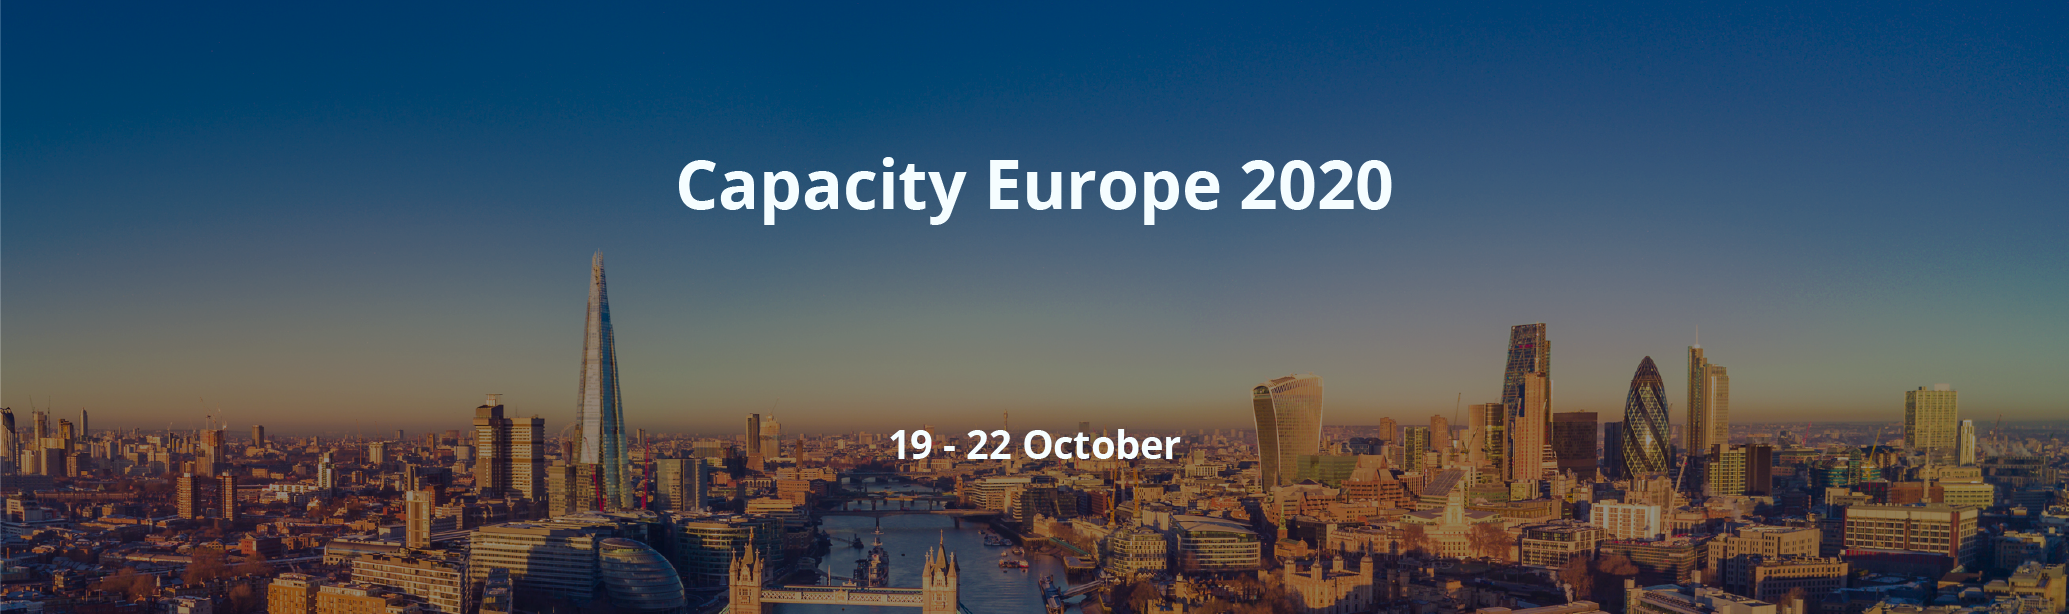 Meet the DIDWW team at the Capacity Europe 2020 virtual event